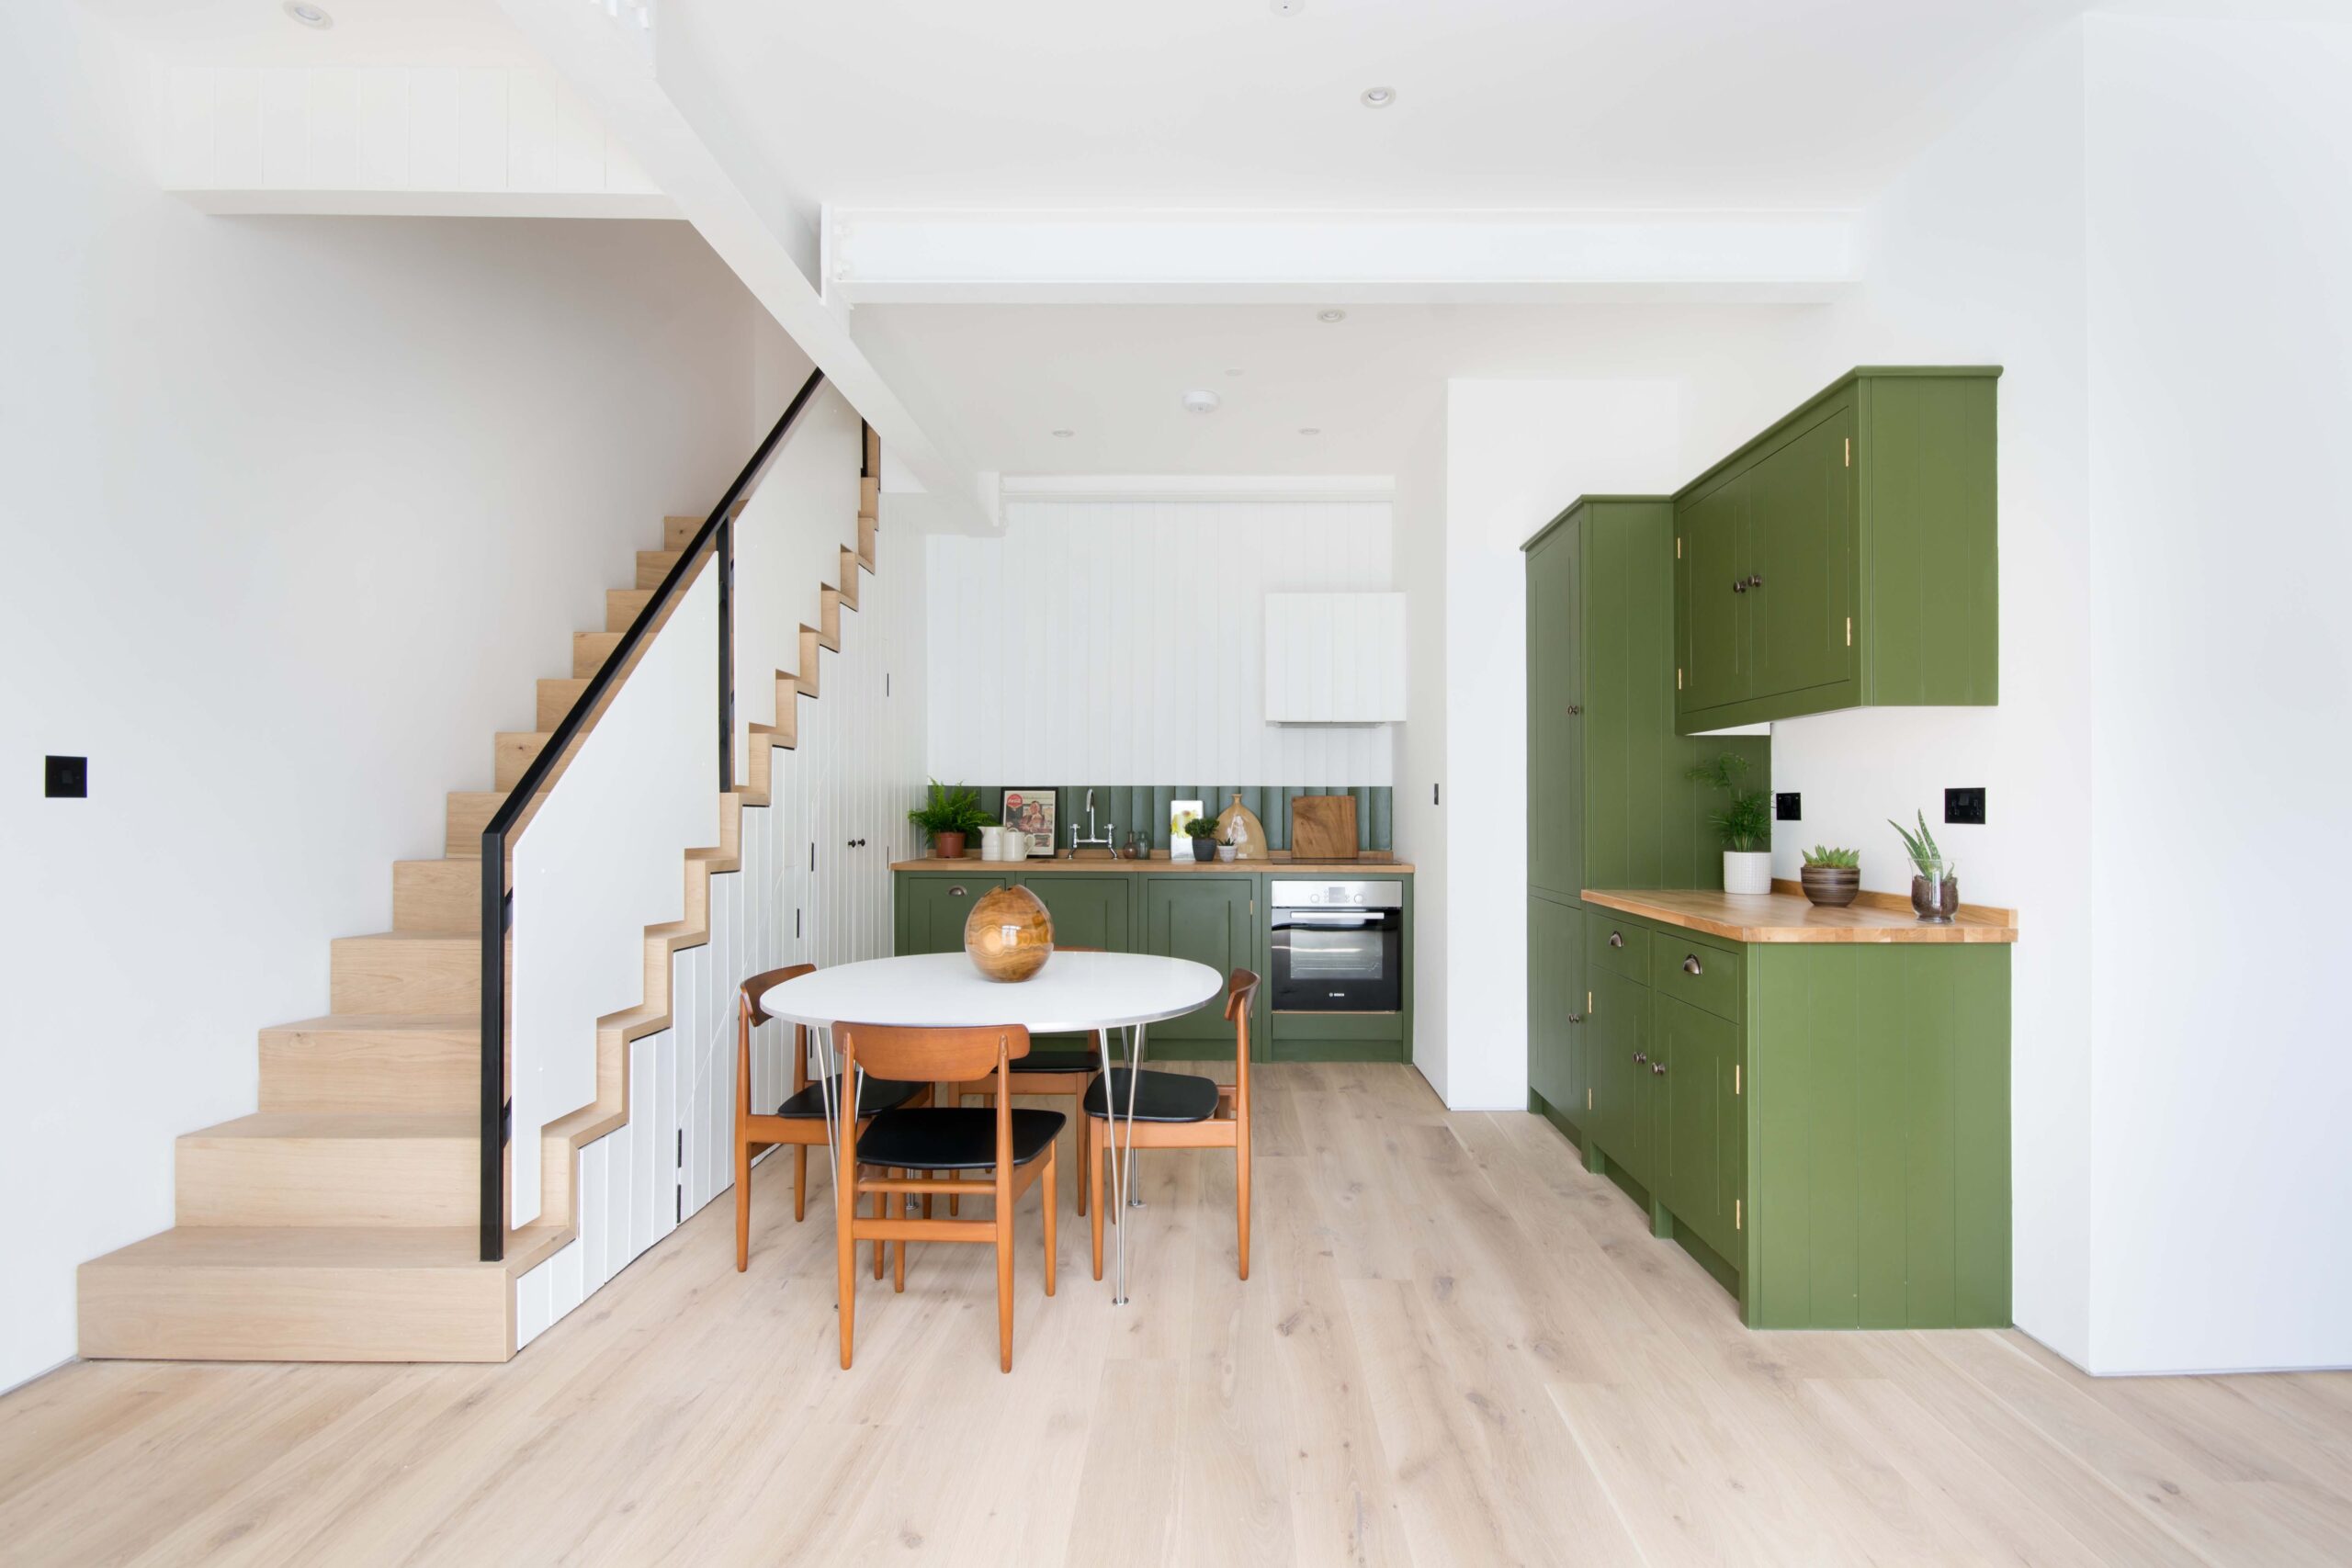 Godolphin Road Shepherd's Bush W12 open-plan kitchen and dining room with green cabinets and white walls